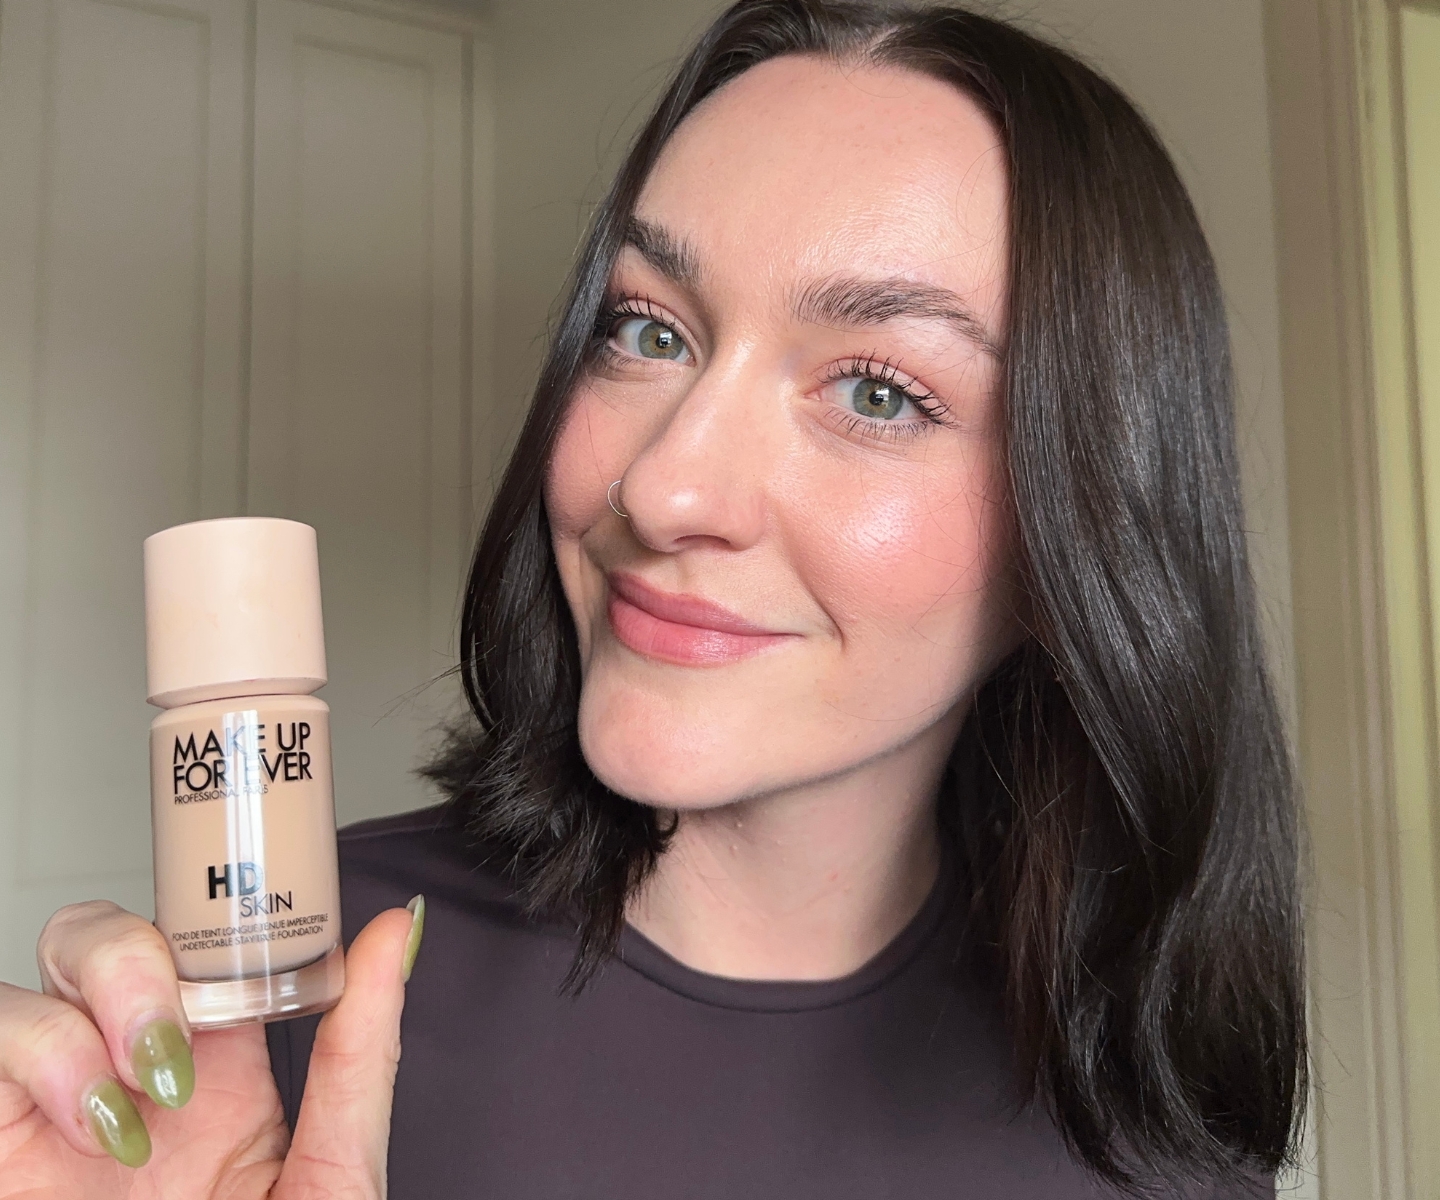 MAKE UP FOR EVER HD Skin Foundation Jas in-article